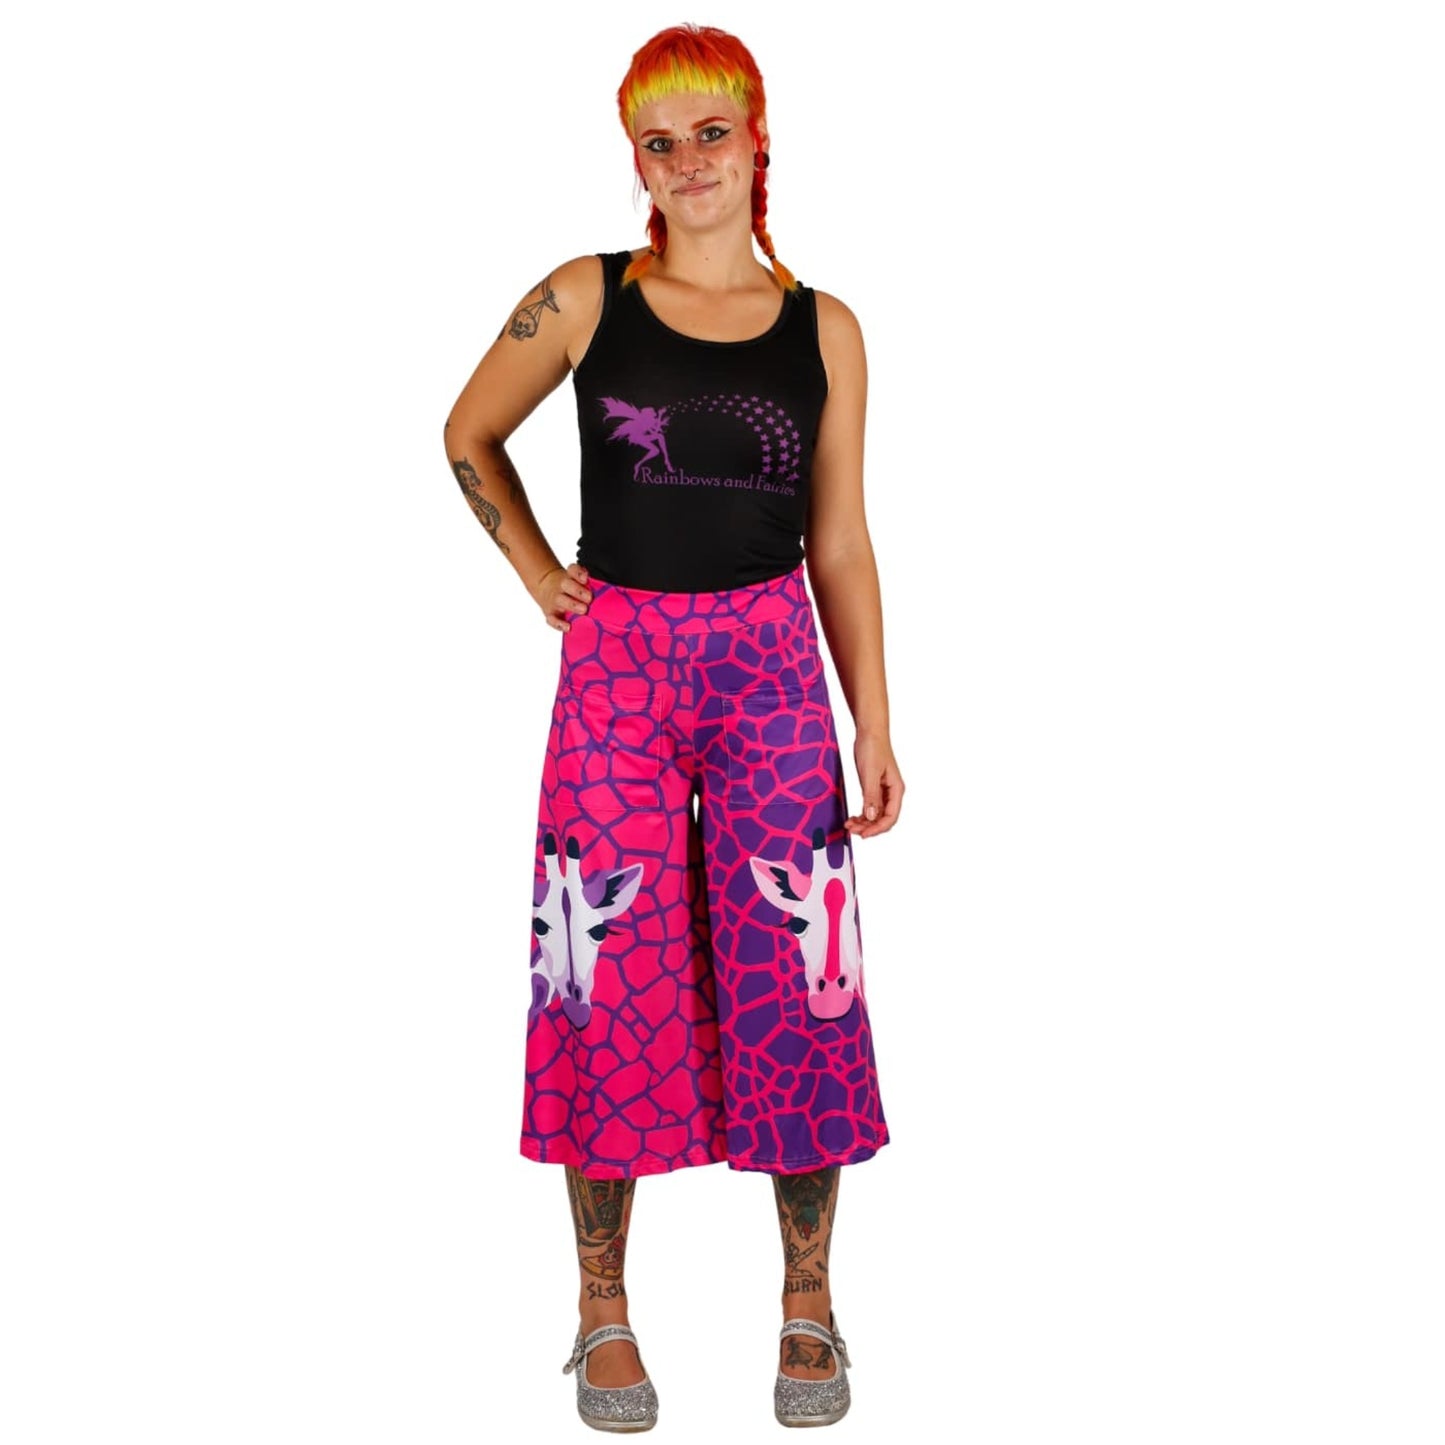 Andy Culottes by RainbowsAndFairies.com (Giraffe - Pink & Purple - Jungle - 3 Quarter Pants - Rockabilly - Vintage Inspired) - SKU: CL_CULTS_ANDYG_PNK - Pic 02